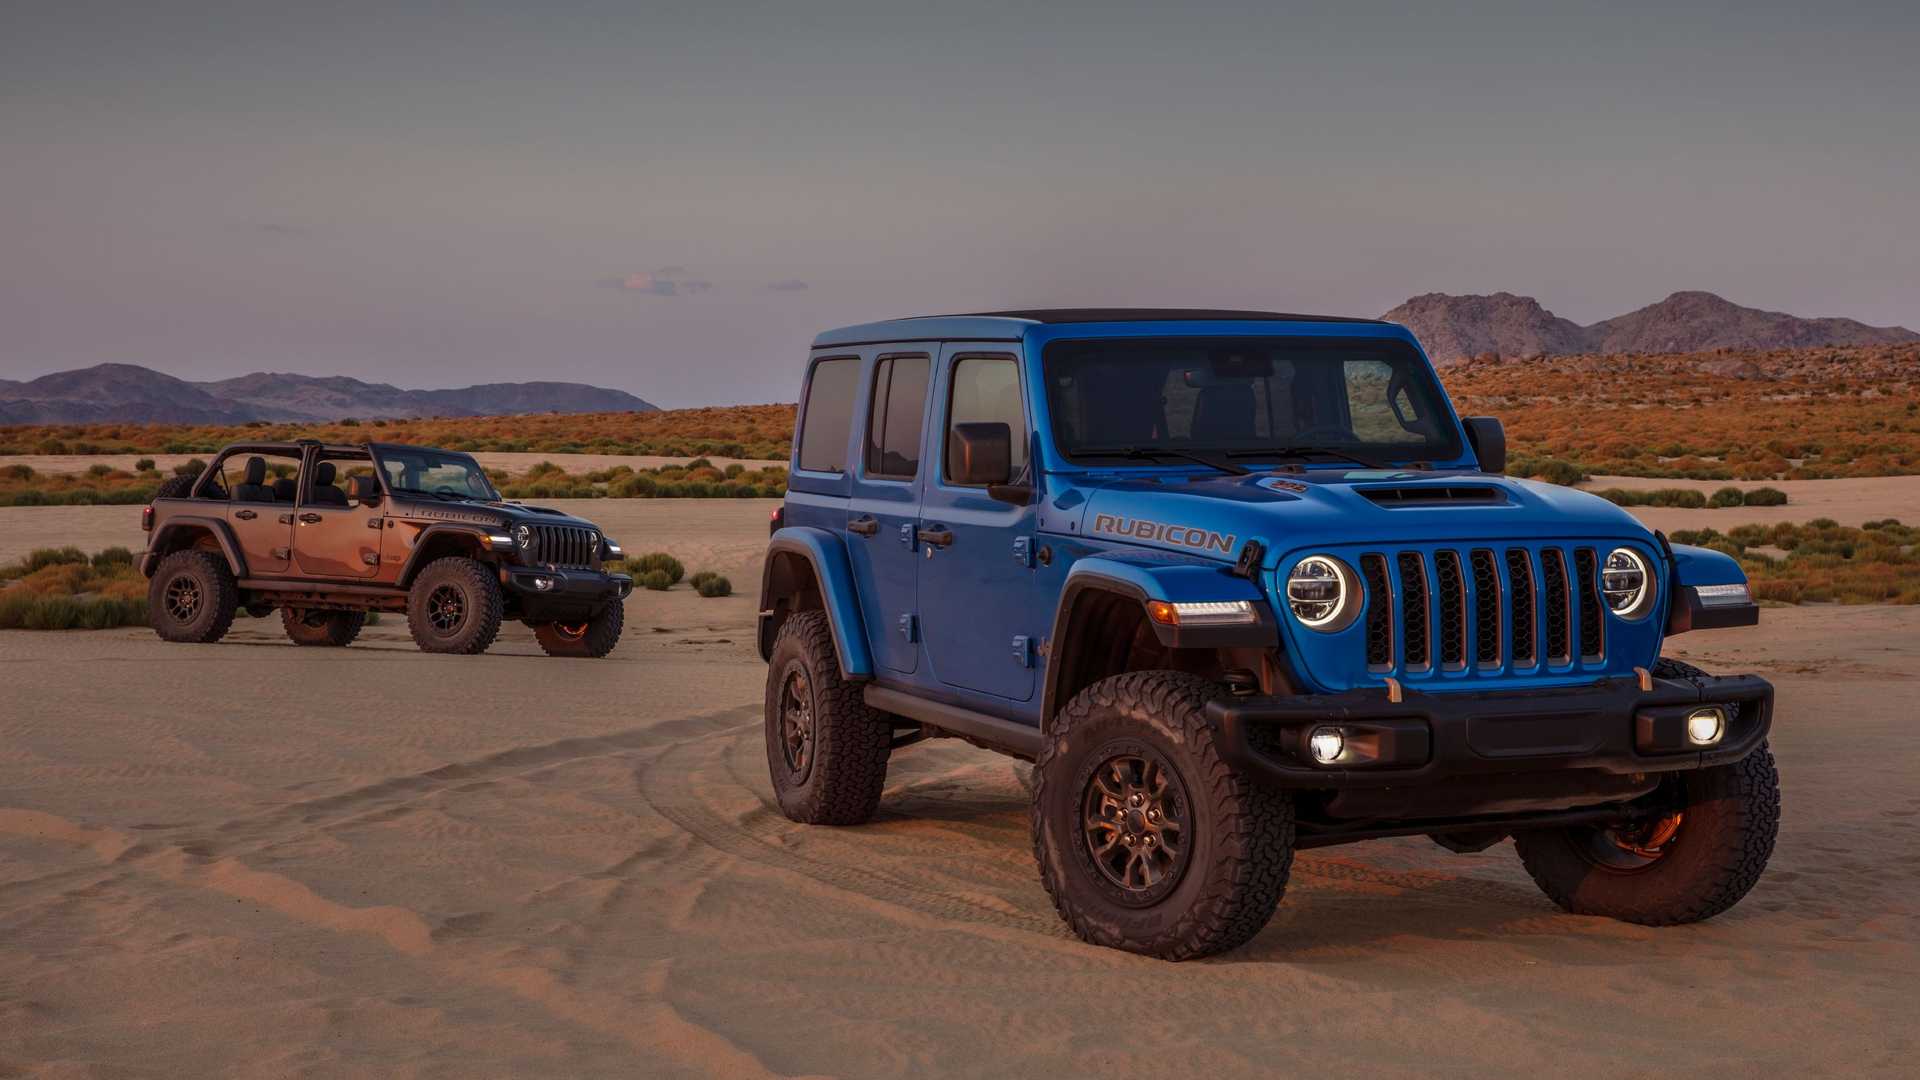 The 2021 Jeep Rubicon 392 Is Wildly Overpriced